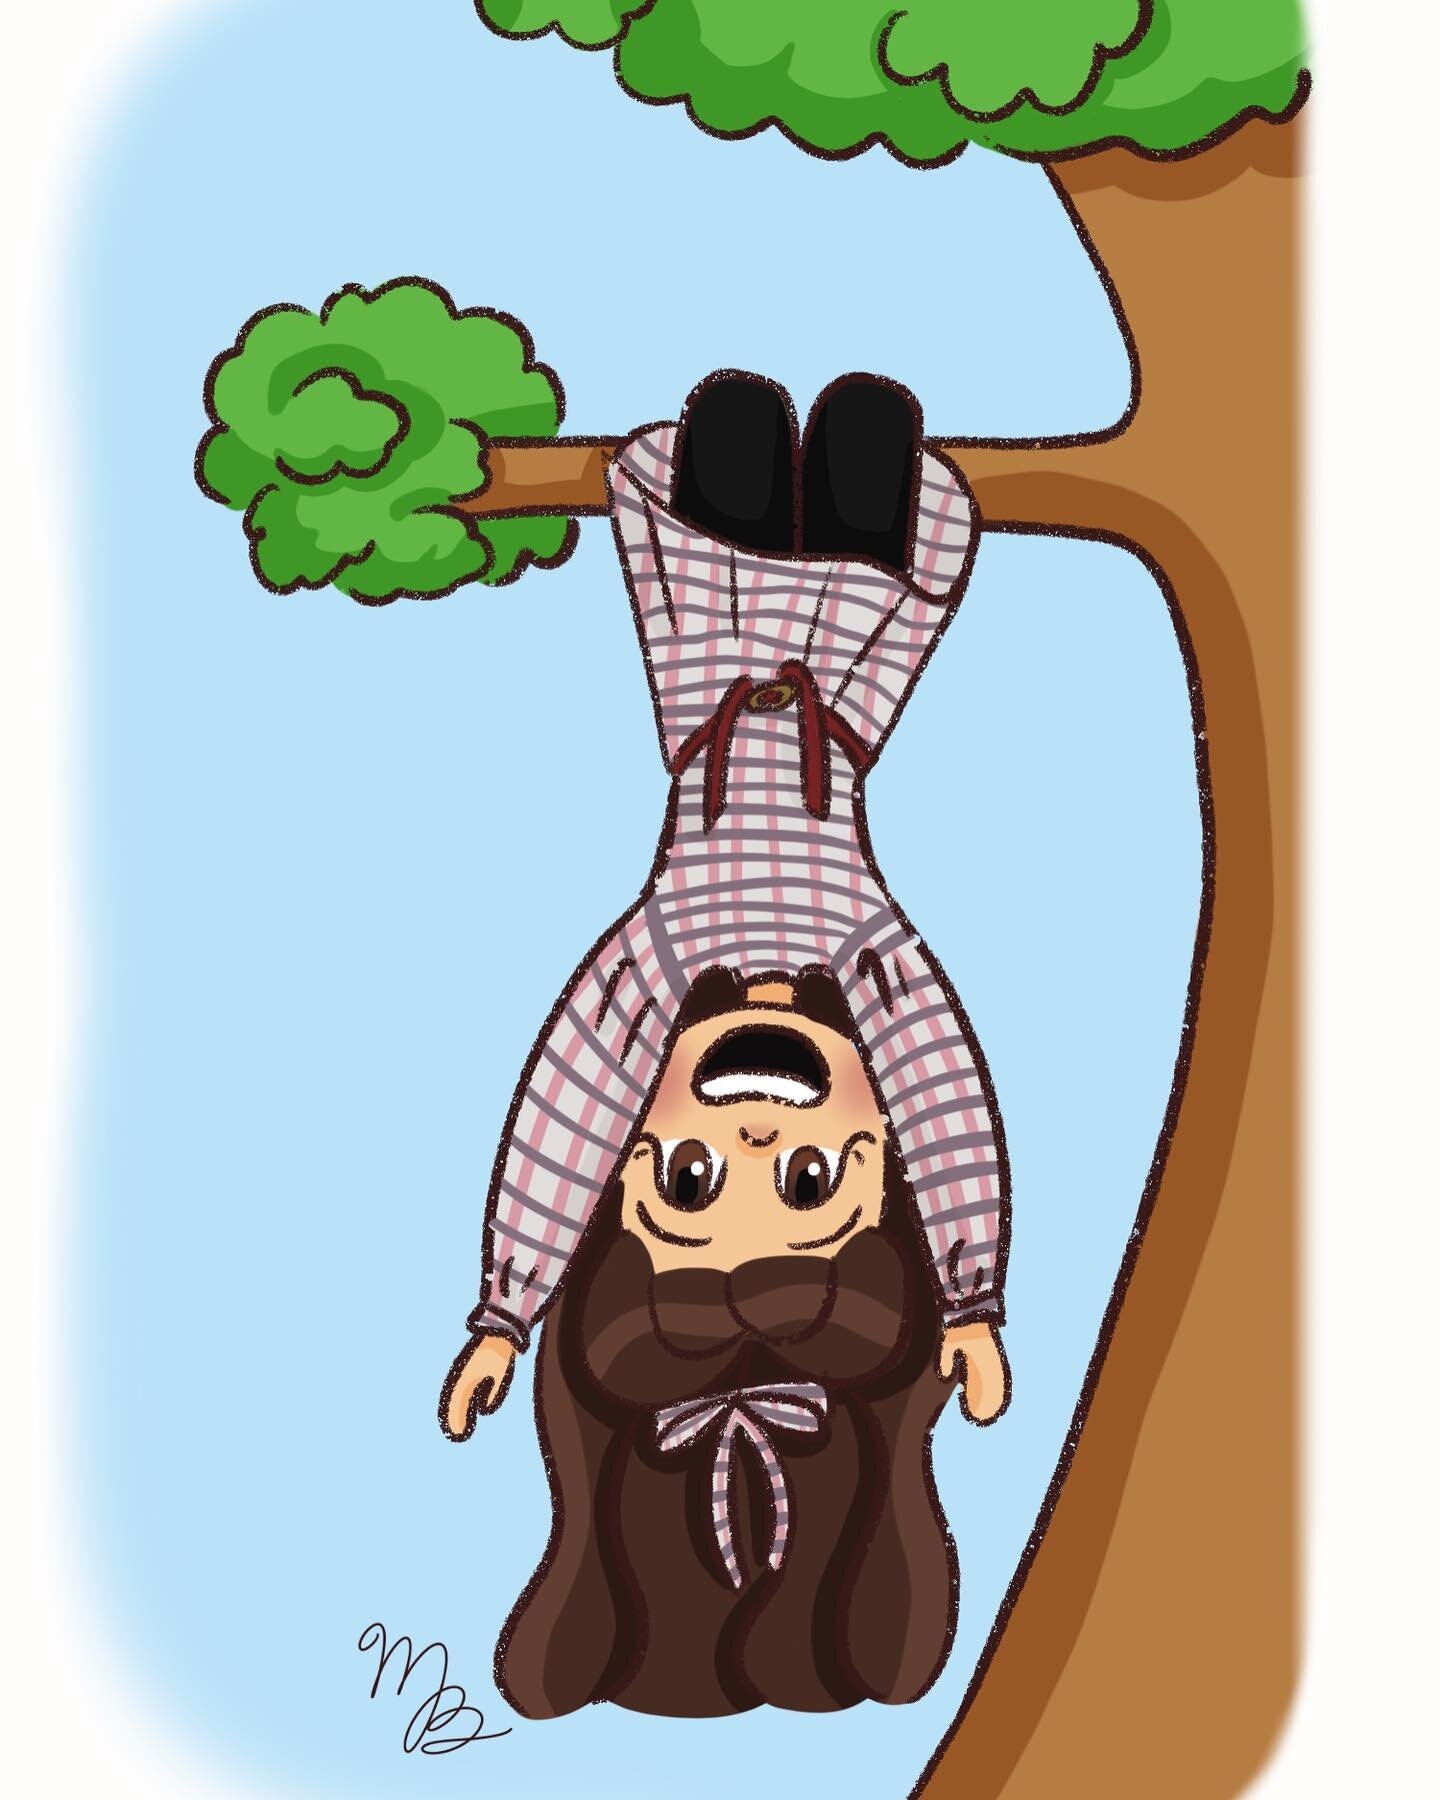 Samantha is the queen of tree climbing, don&rsquo;t you agree?
 
*No stockings were harmed in the making of this art* 😉